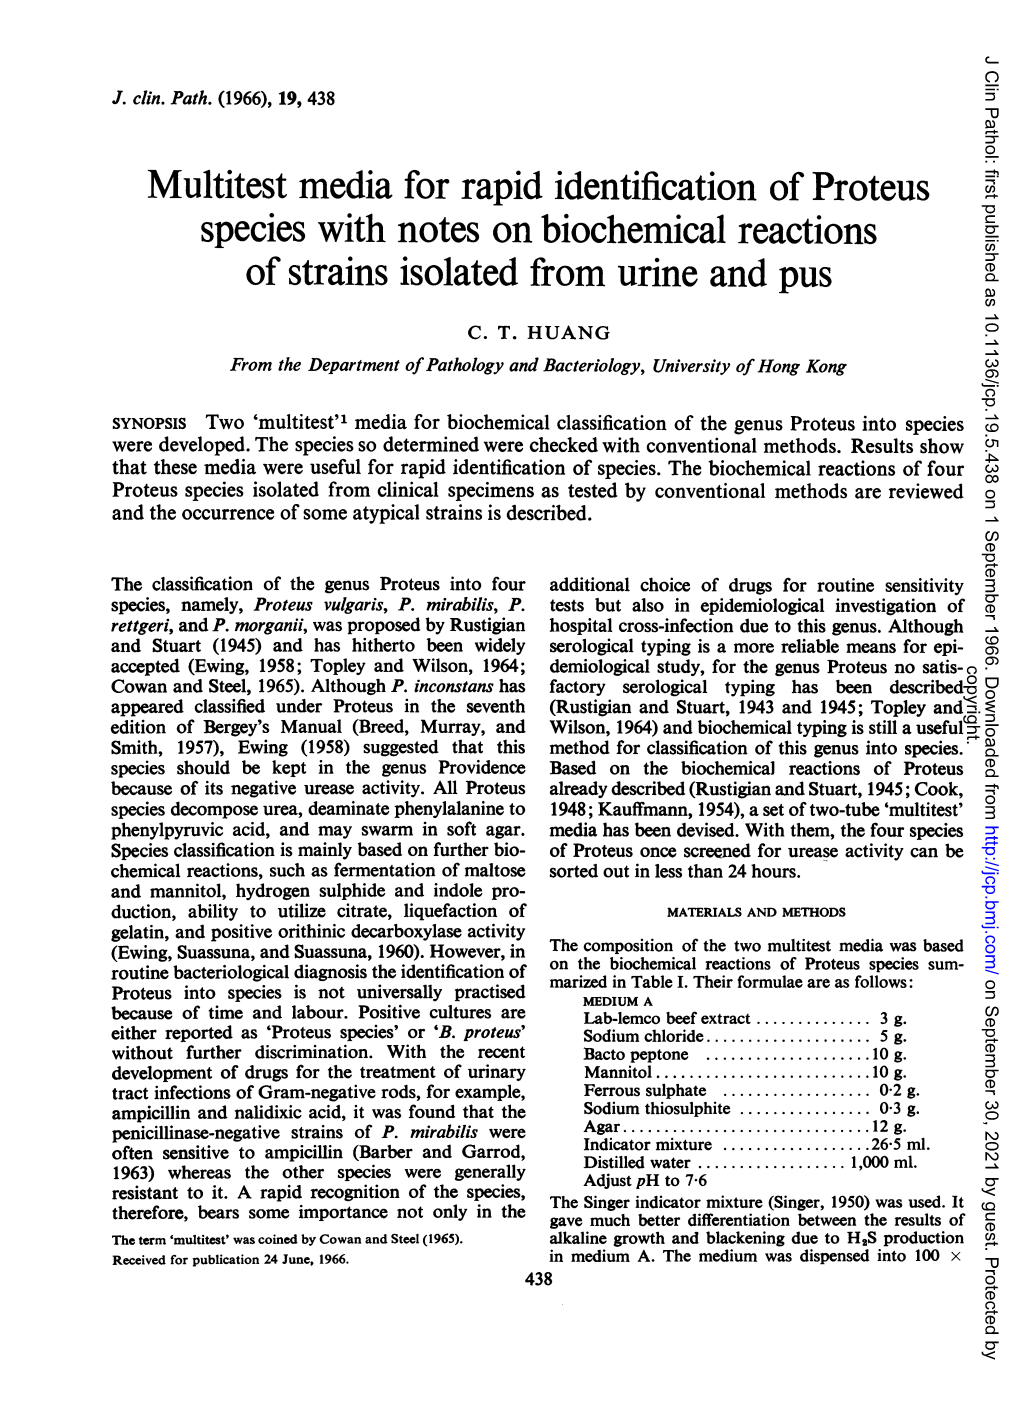 Multitest Media for Rapid Identification of Proteus Species with Notes on Biochemical Reactions of Strains Isolated from Urine and Pus